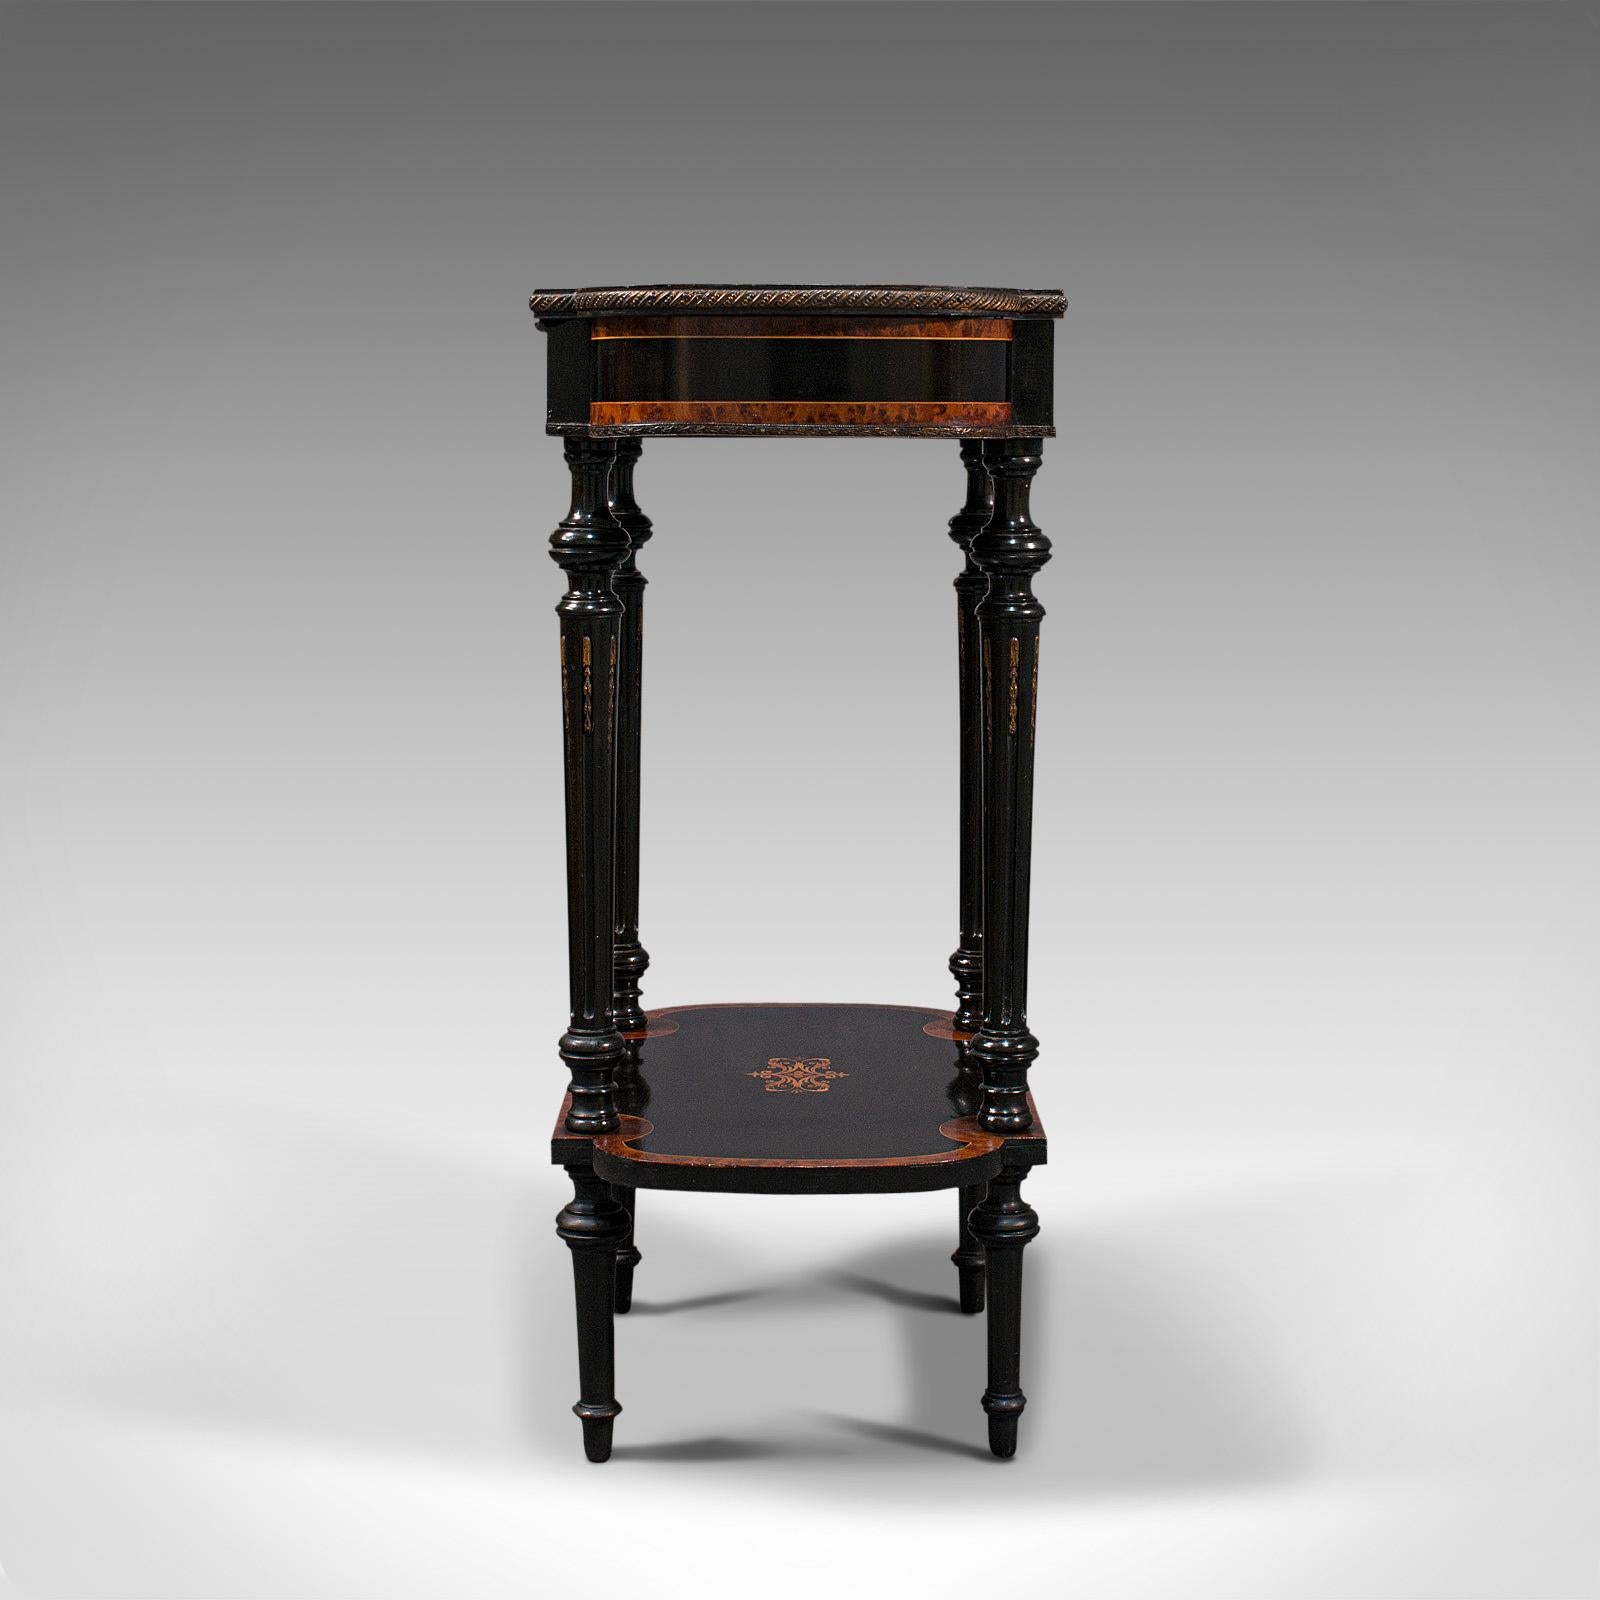 19th Century Antique Napoleon III Side Table, French, Etagere, Burr Walnut, Sewing, C.1870